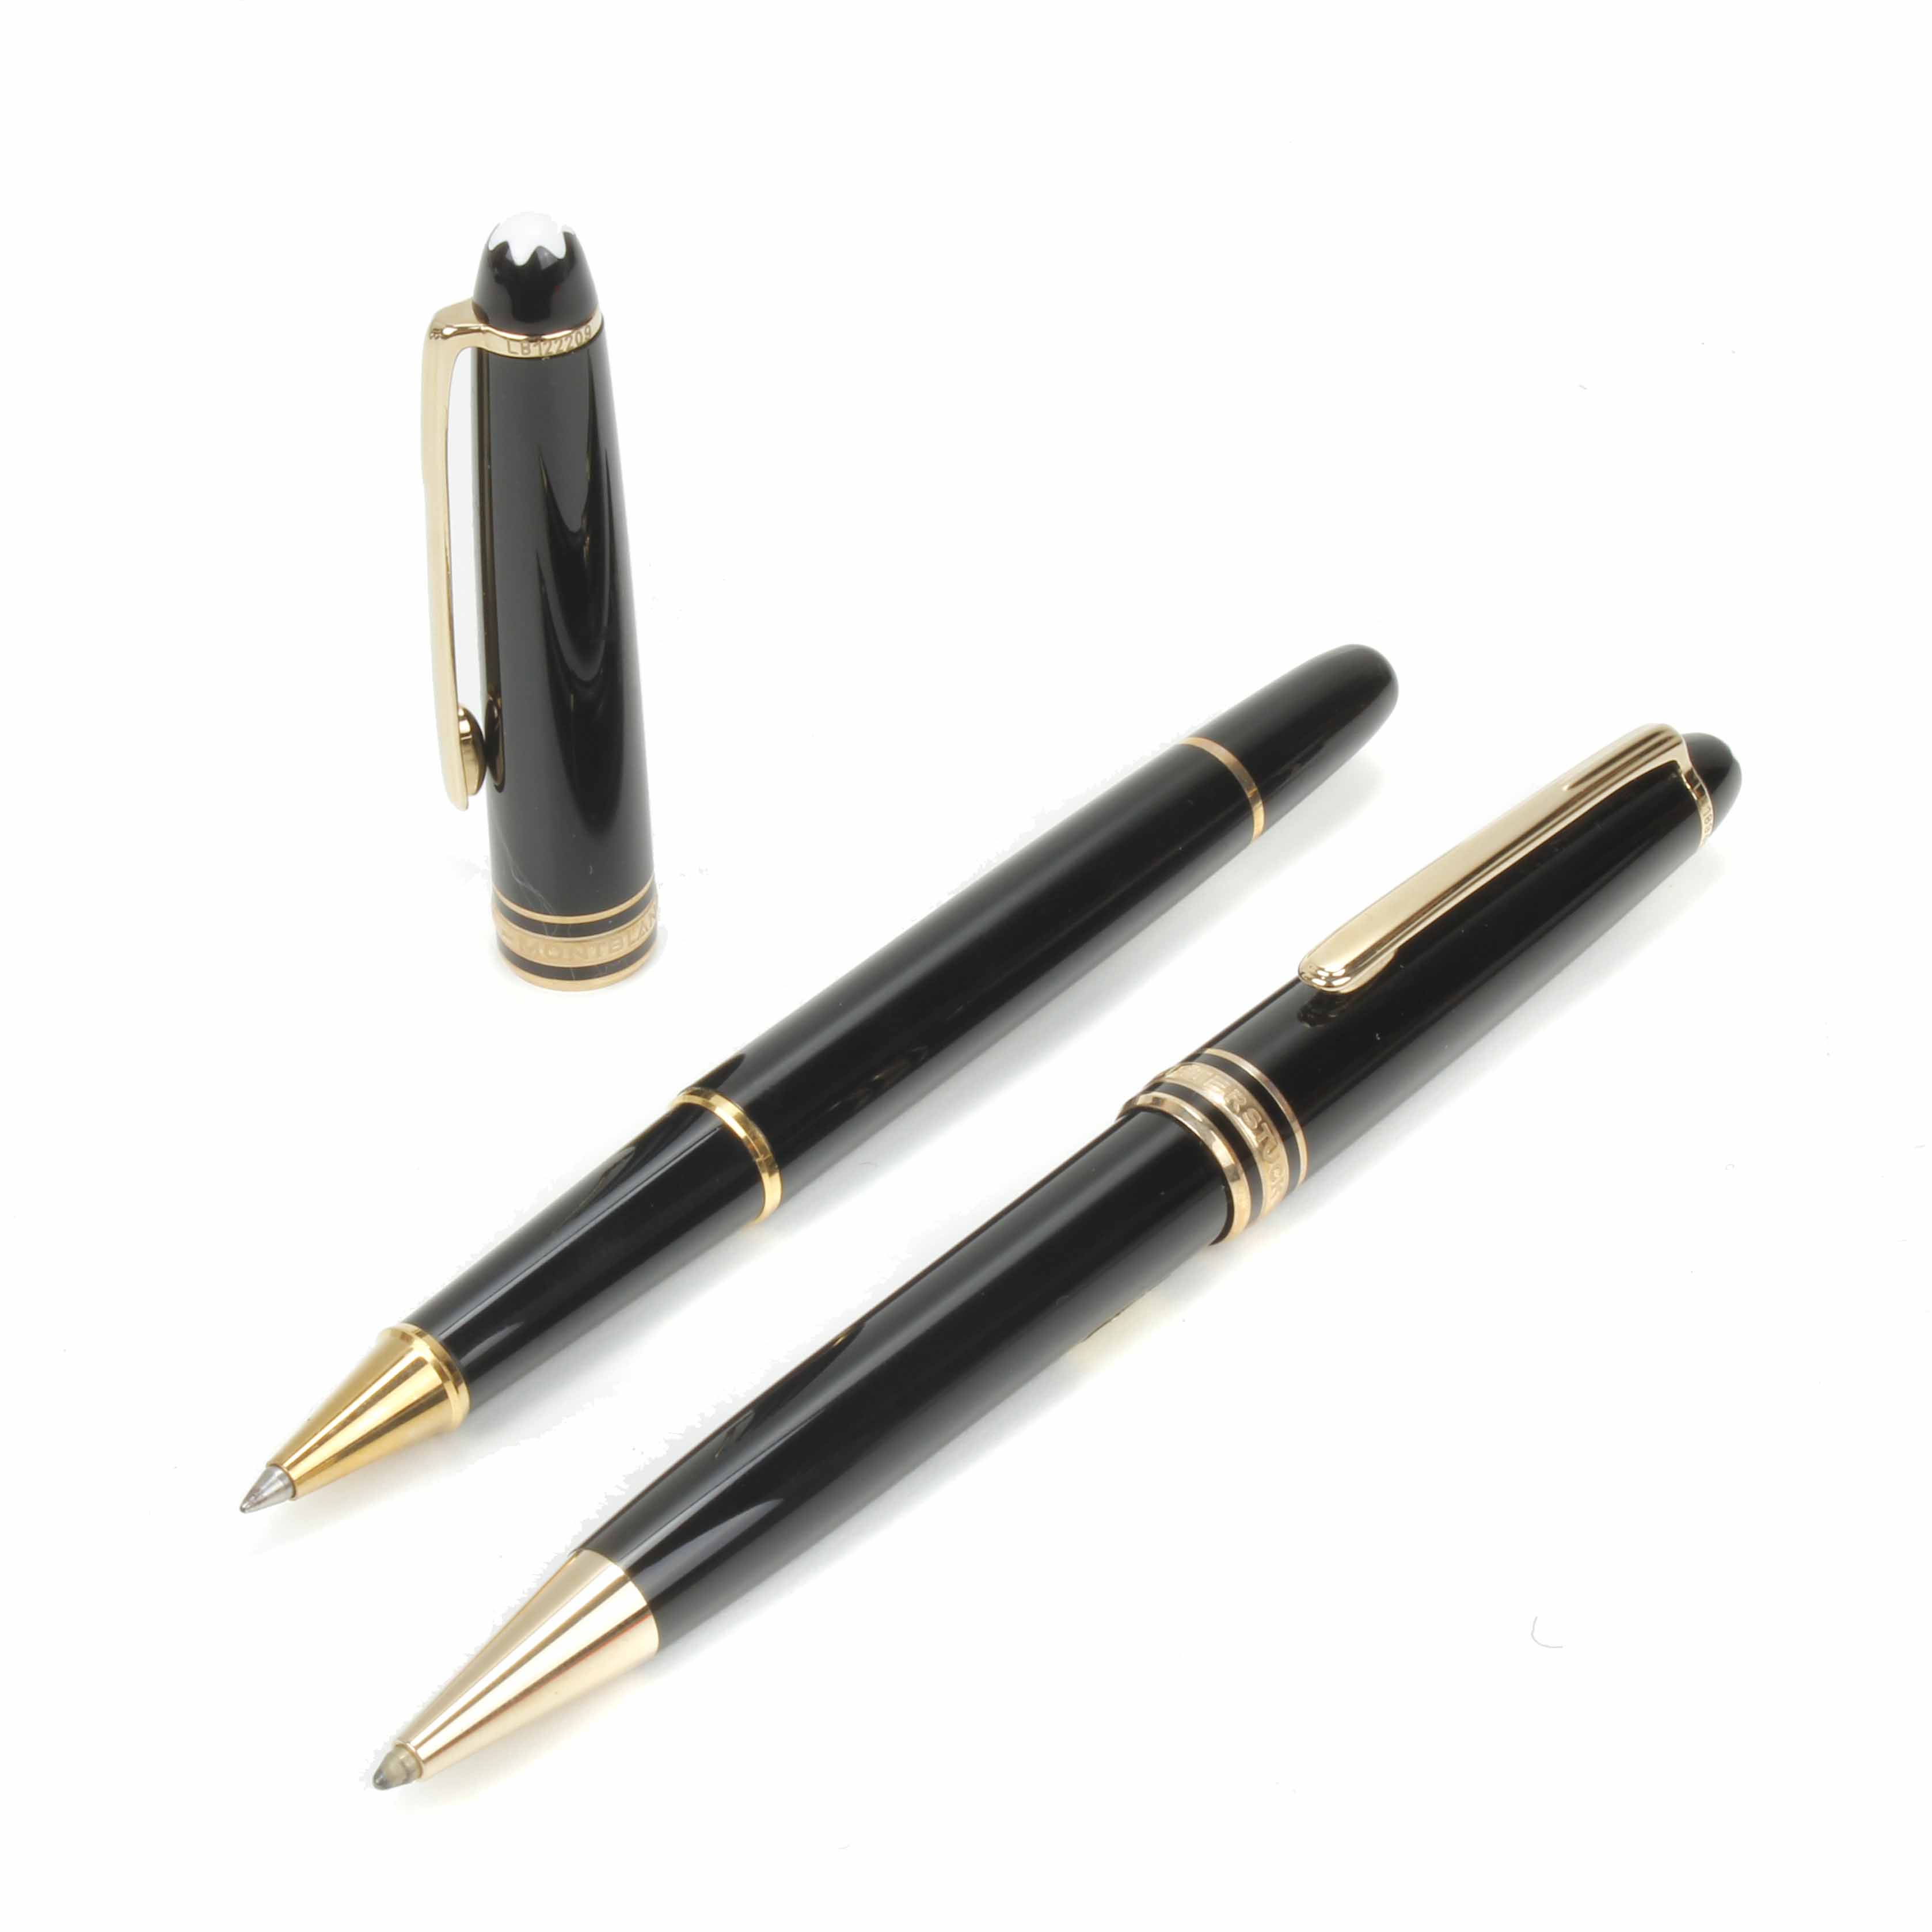 MONTBLANC. SET OF TWO MEISTERSTÜCK PENS.